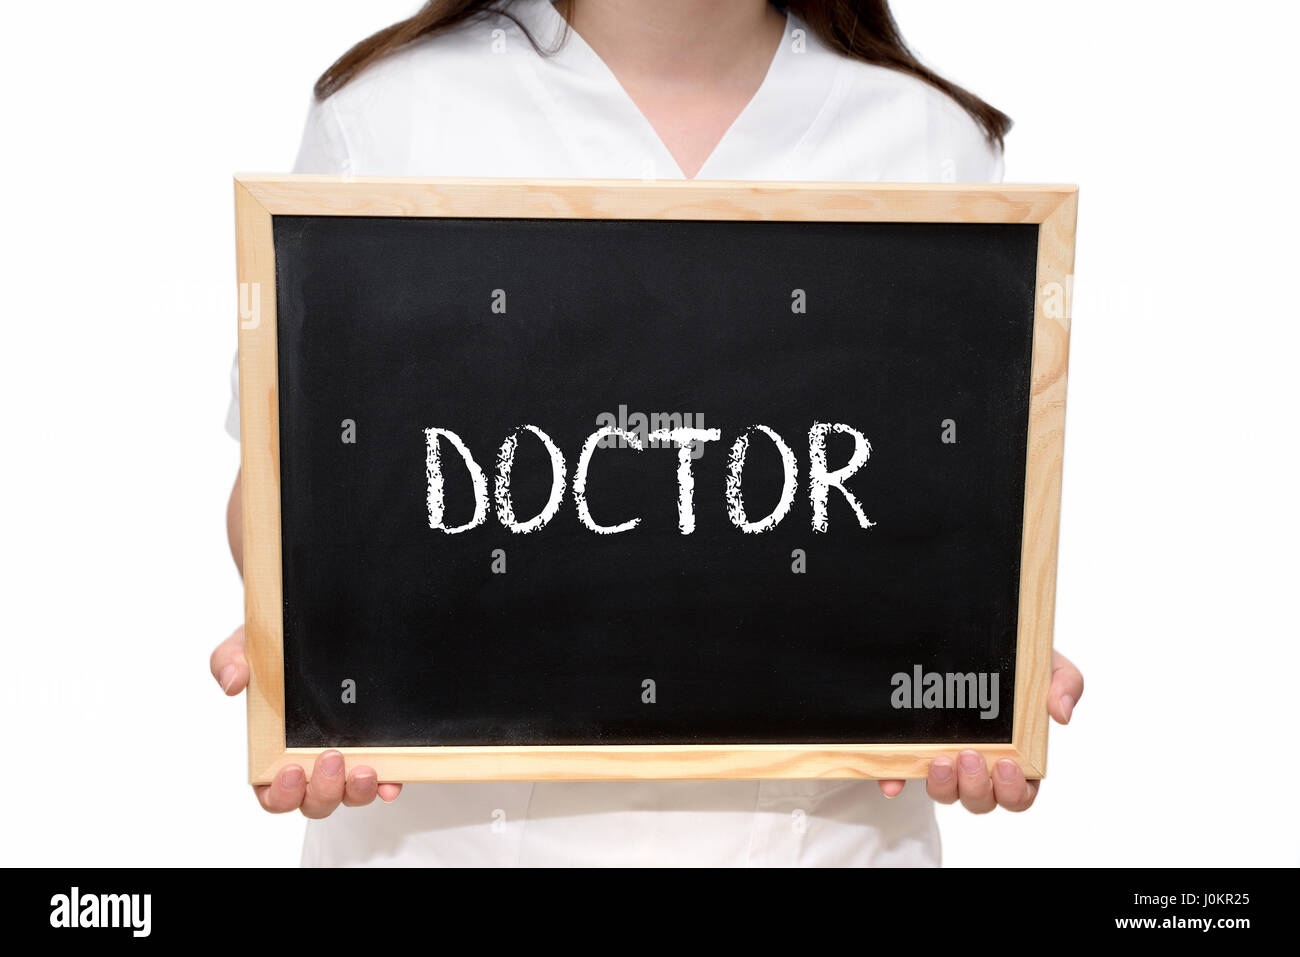 Female nurse holding a slate board with the text Doctor written with chalk, isolated on white background. Stock Photo